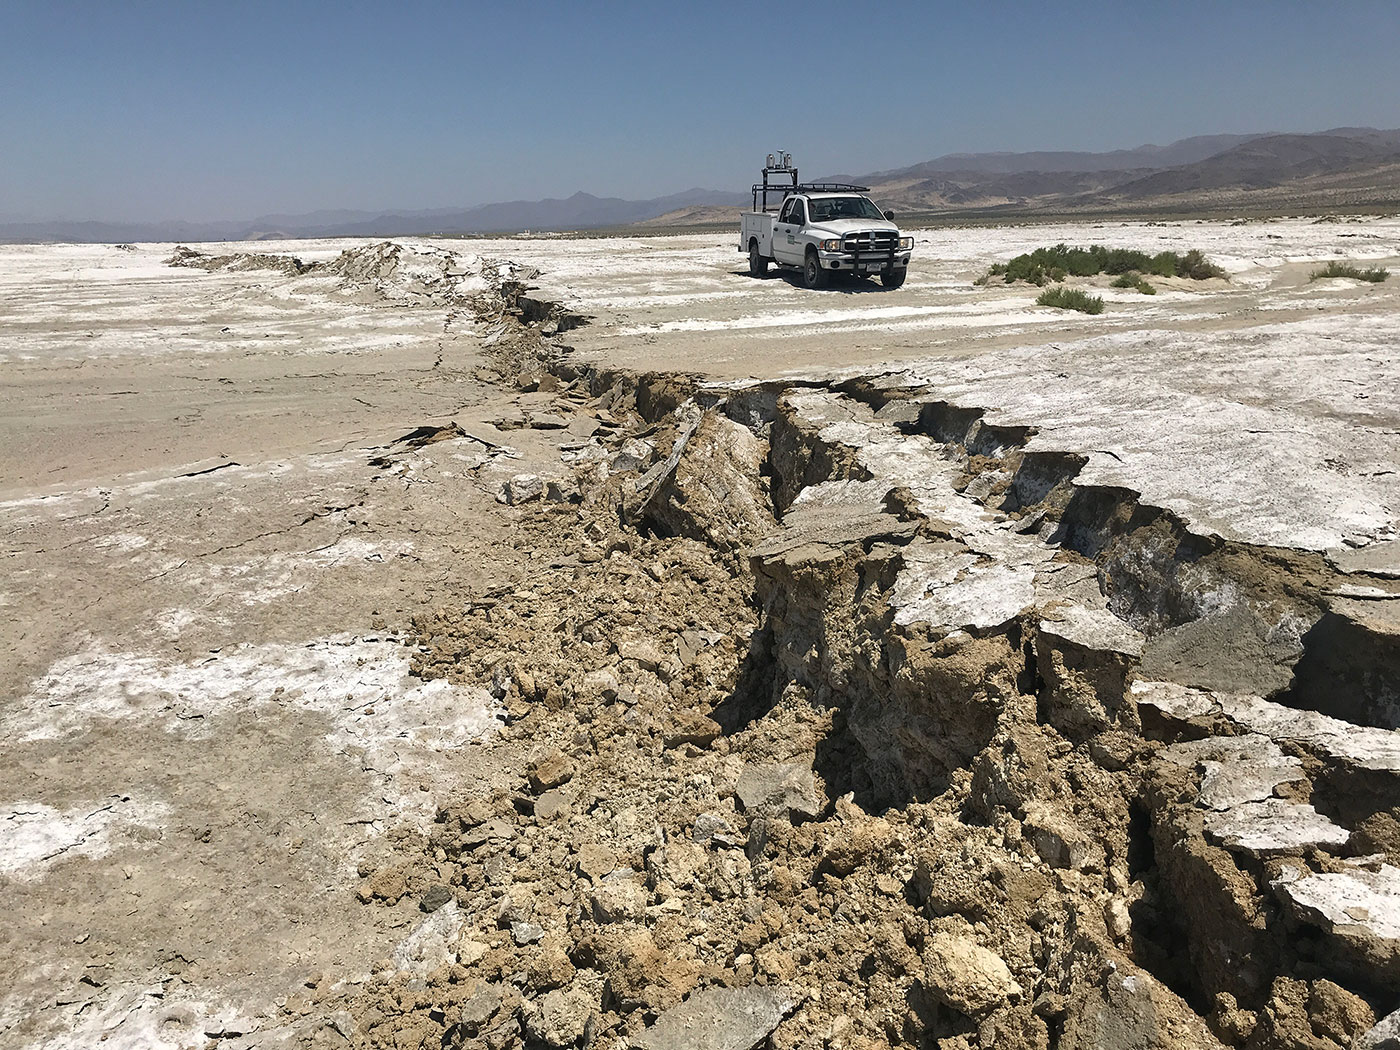 A USGS Earthquake Science Center Mobile Laser Scanning truck scans the surface